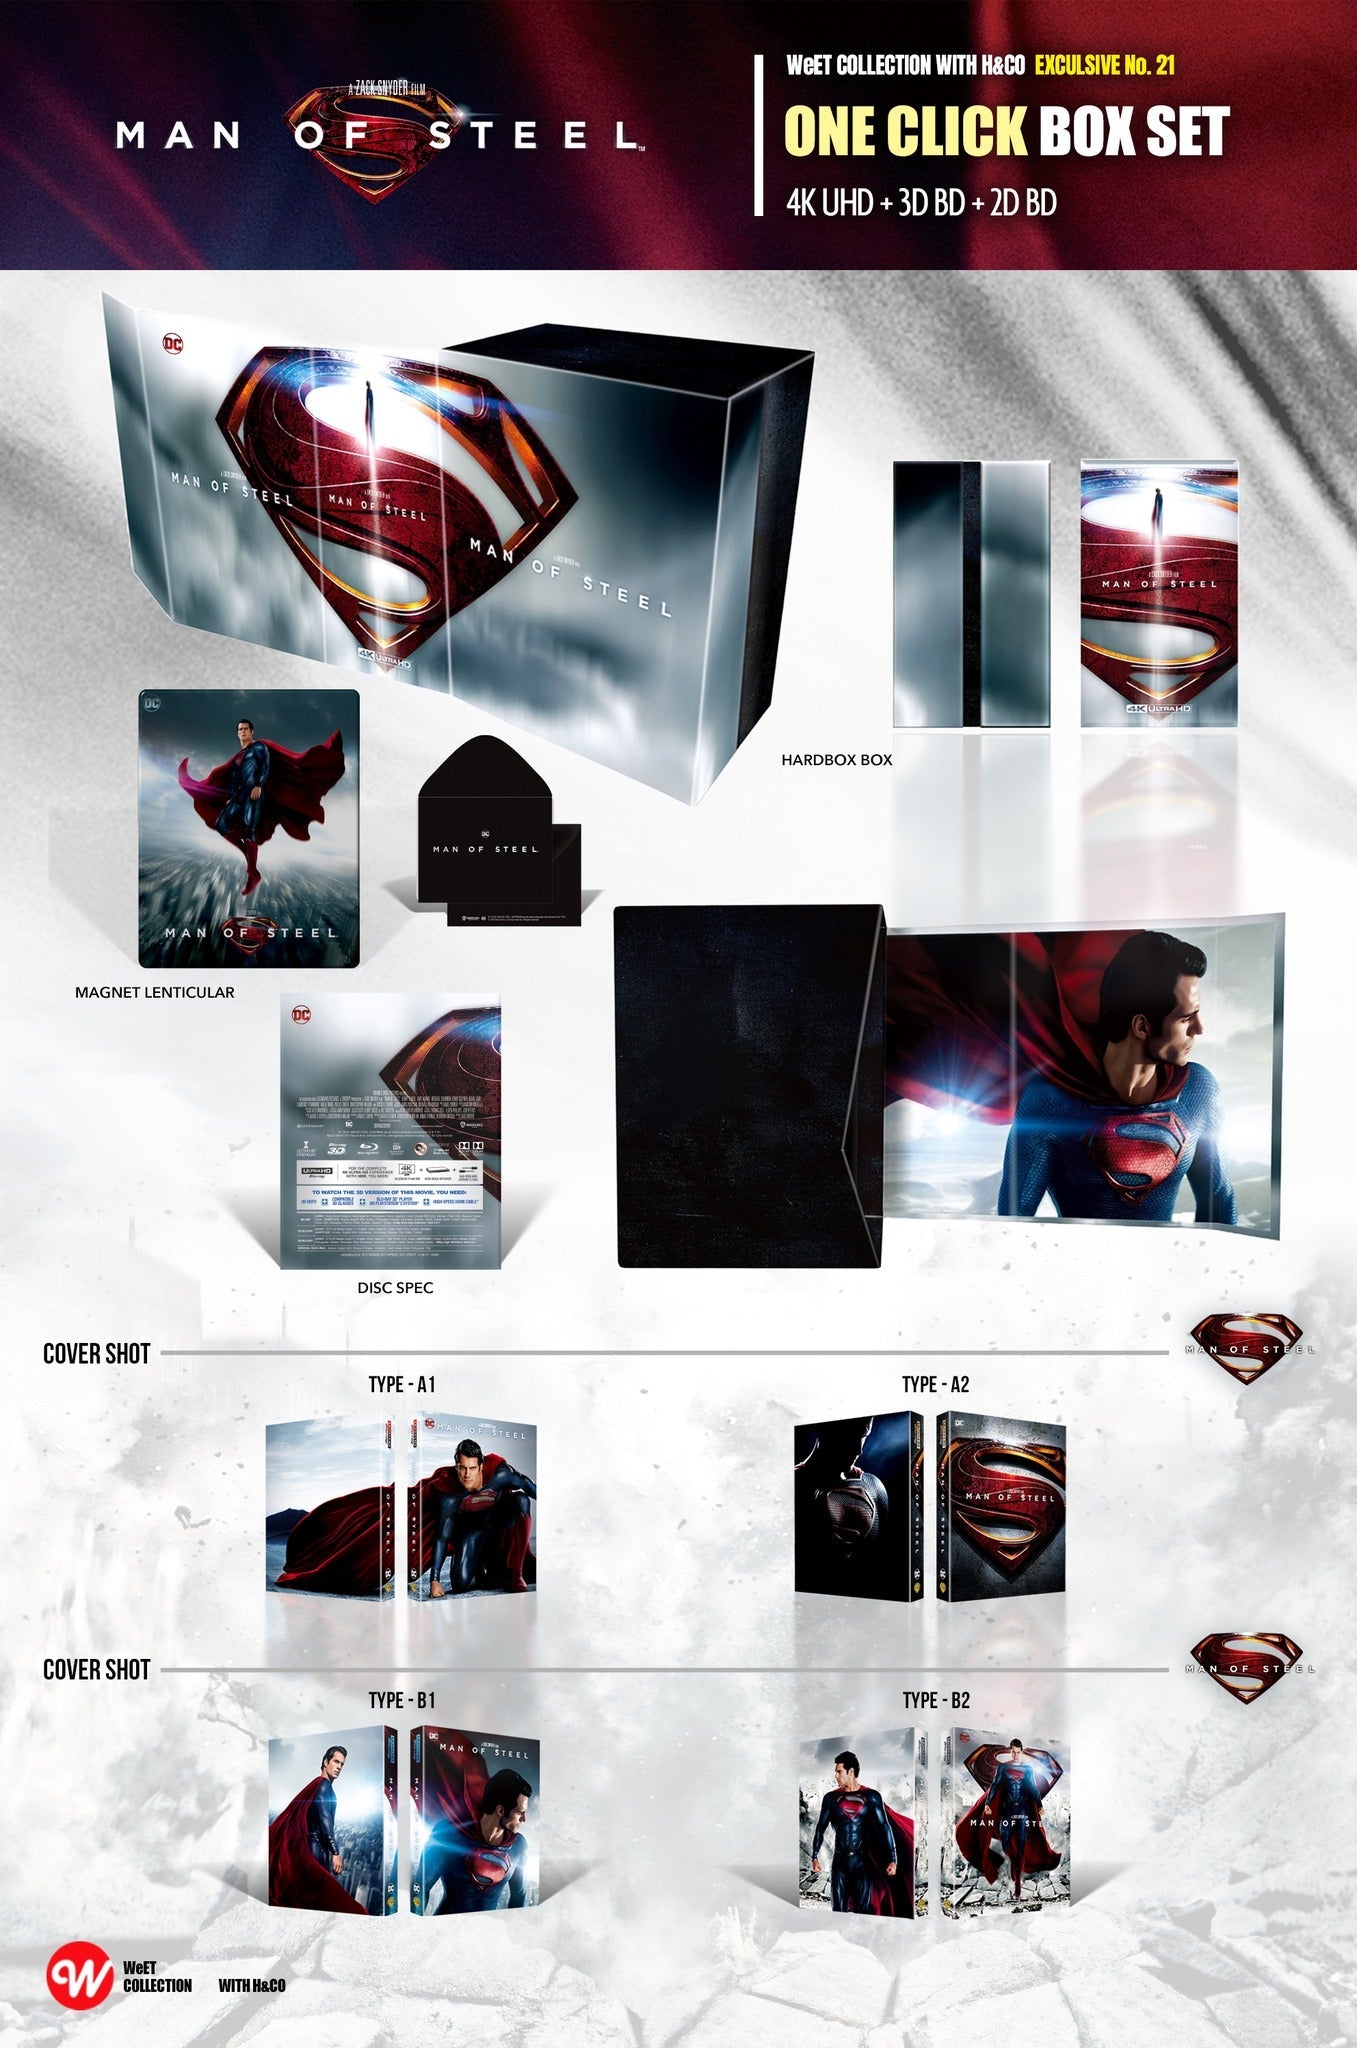 Man Of Steel 4K Blu-ray Steelbook WeET Collection Exclusive #21 One Click Box Set